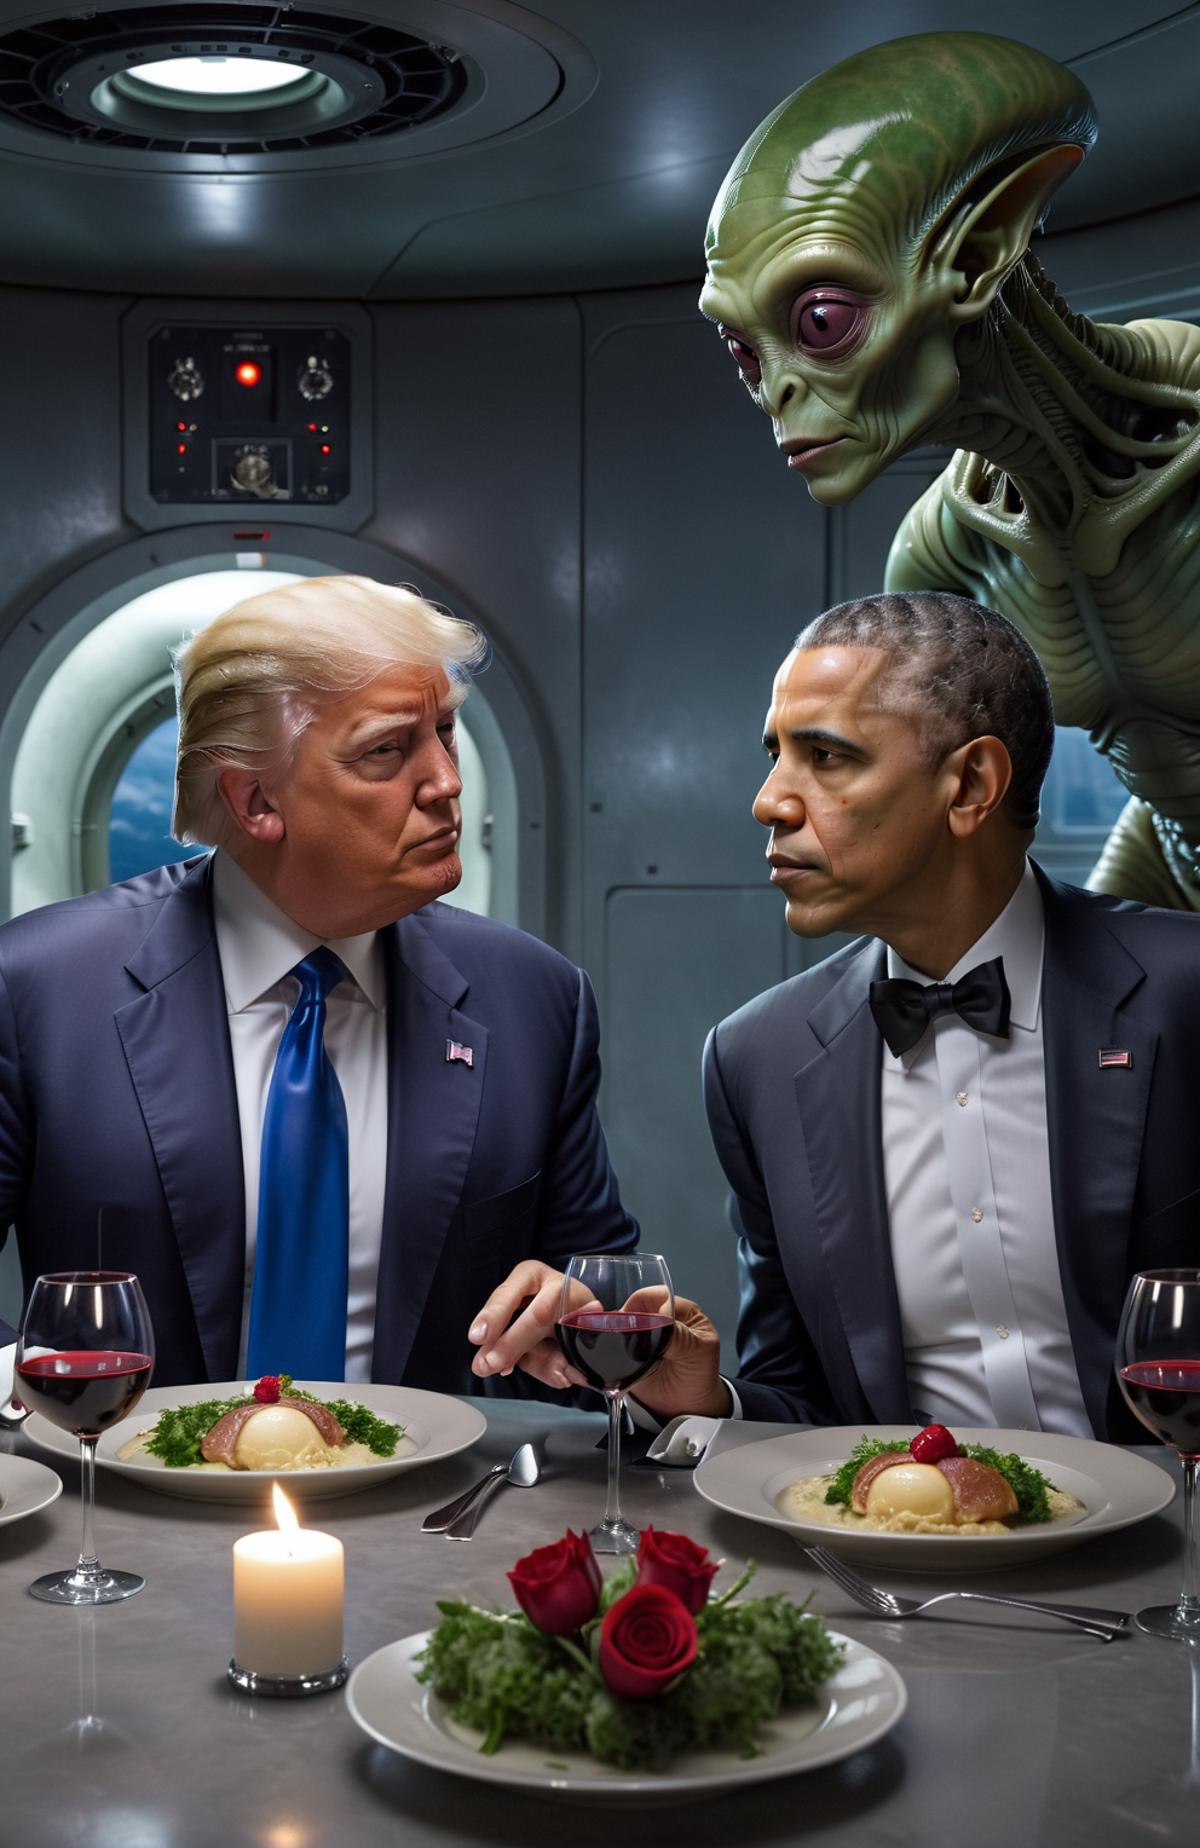 A political satire image featuring President Trump and President Obama at a dinner table with wine glasses and plates of food, including an alien as a guest.